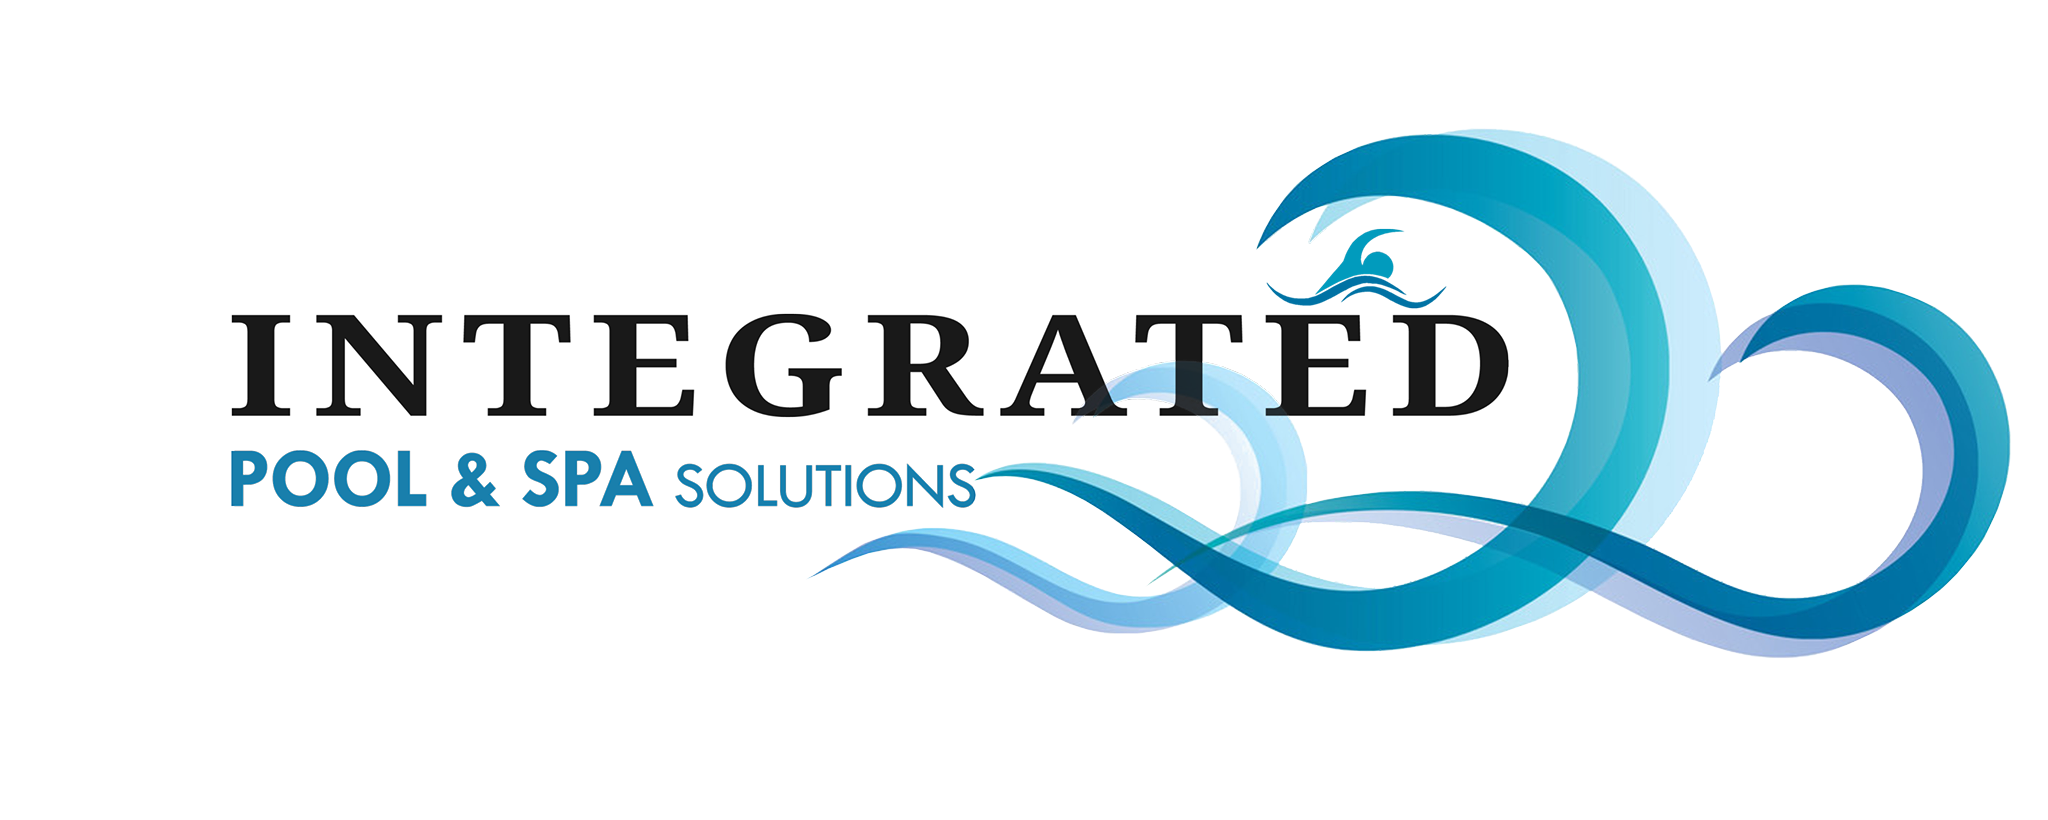 integrated pool solutions